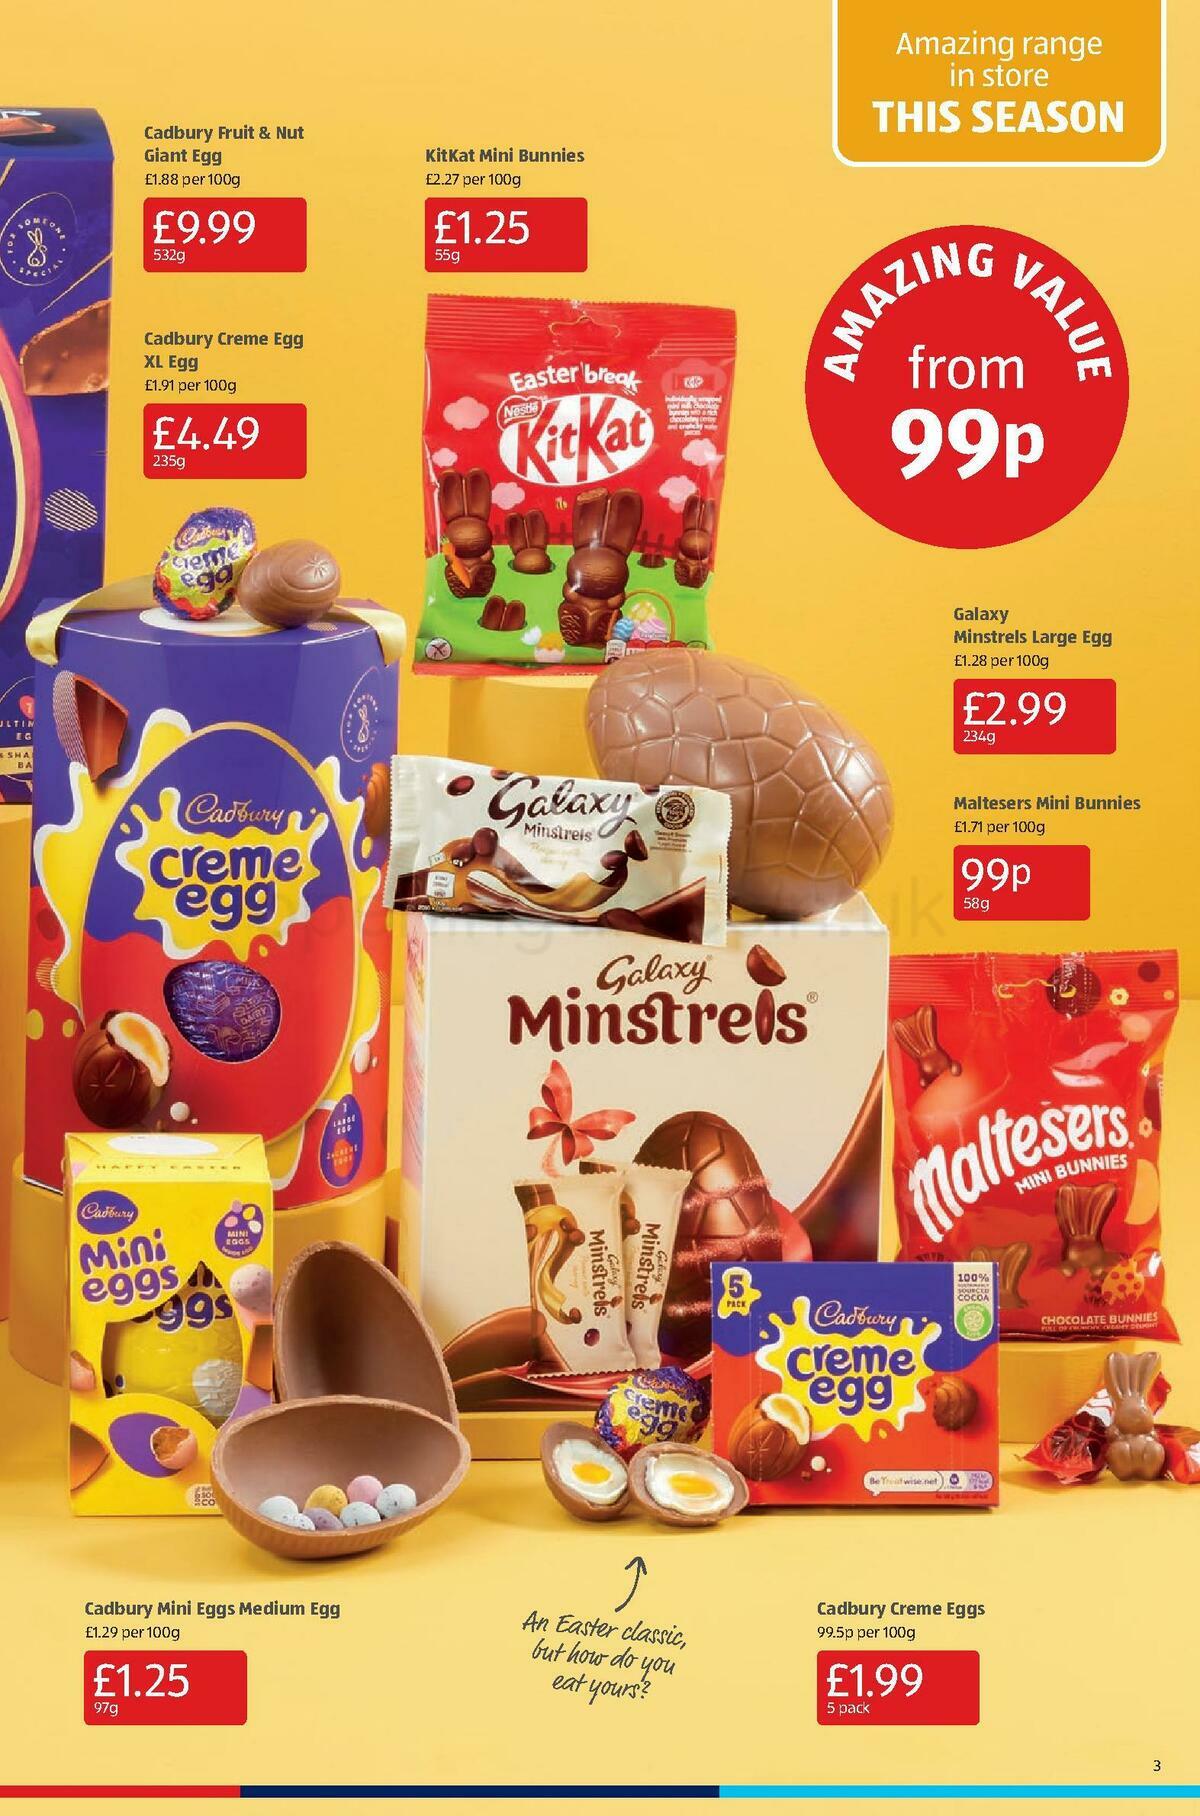 ALDI Scottish Offers from 26 March